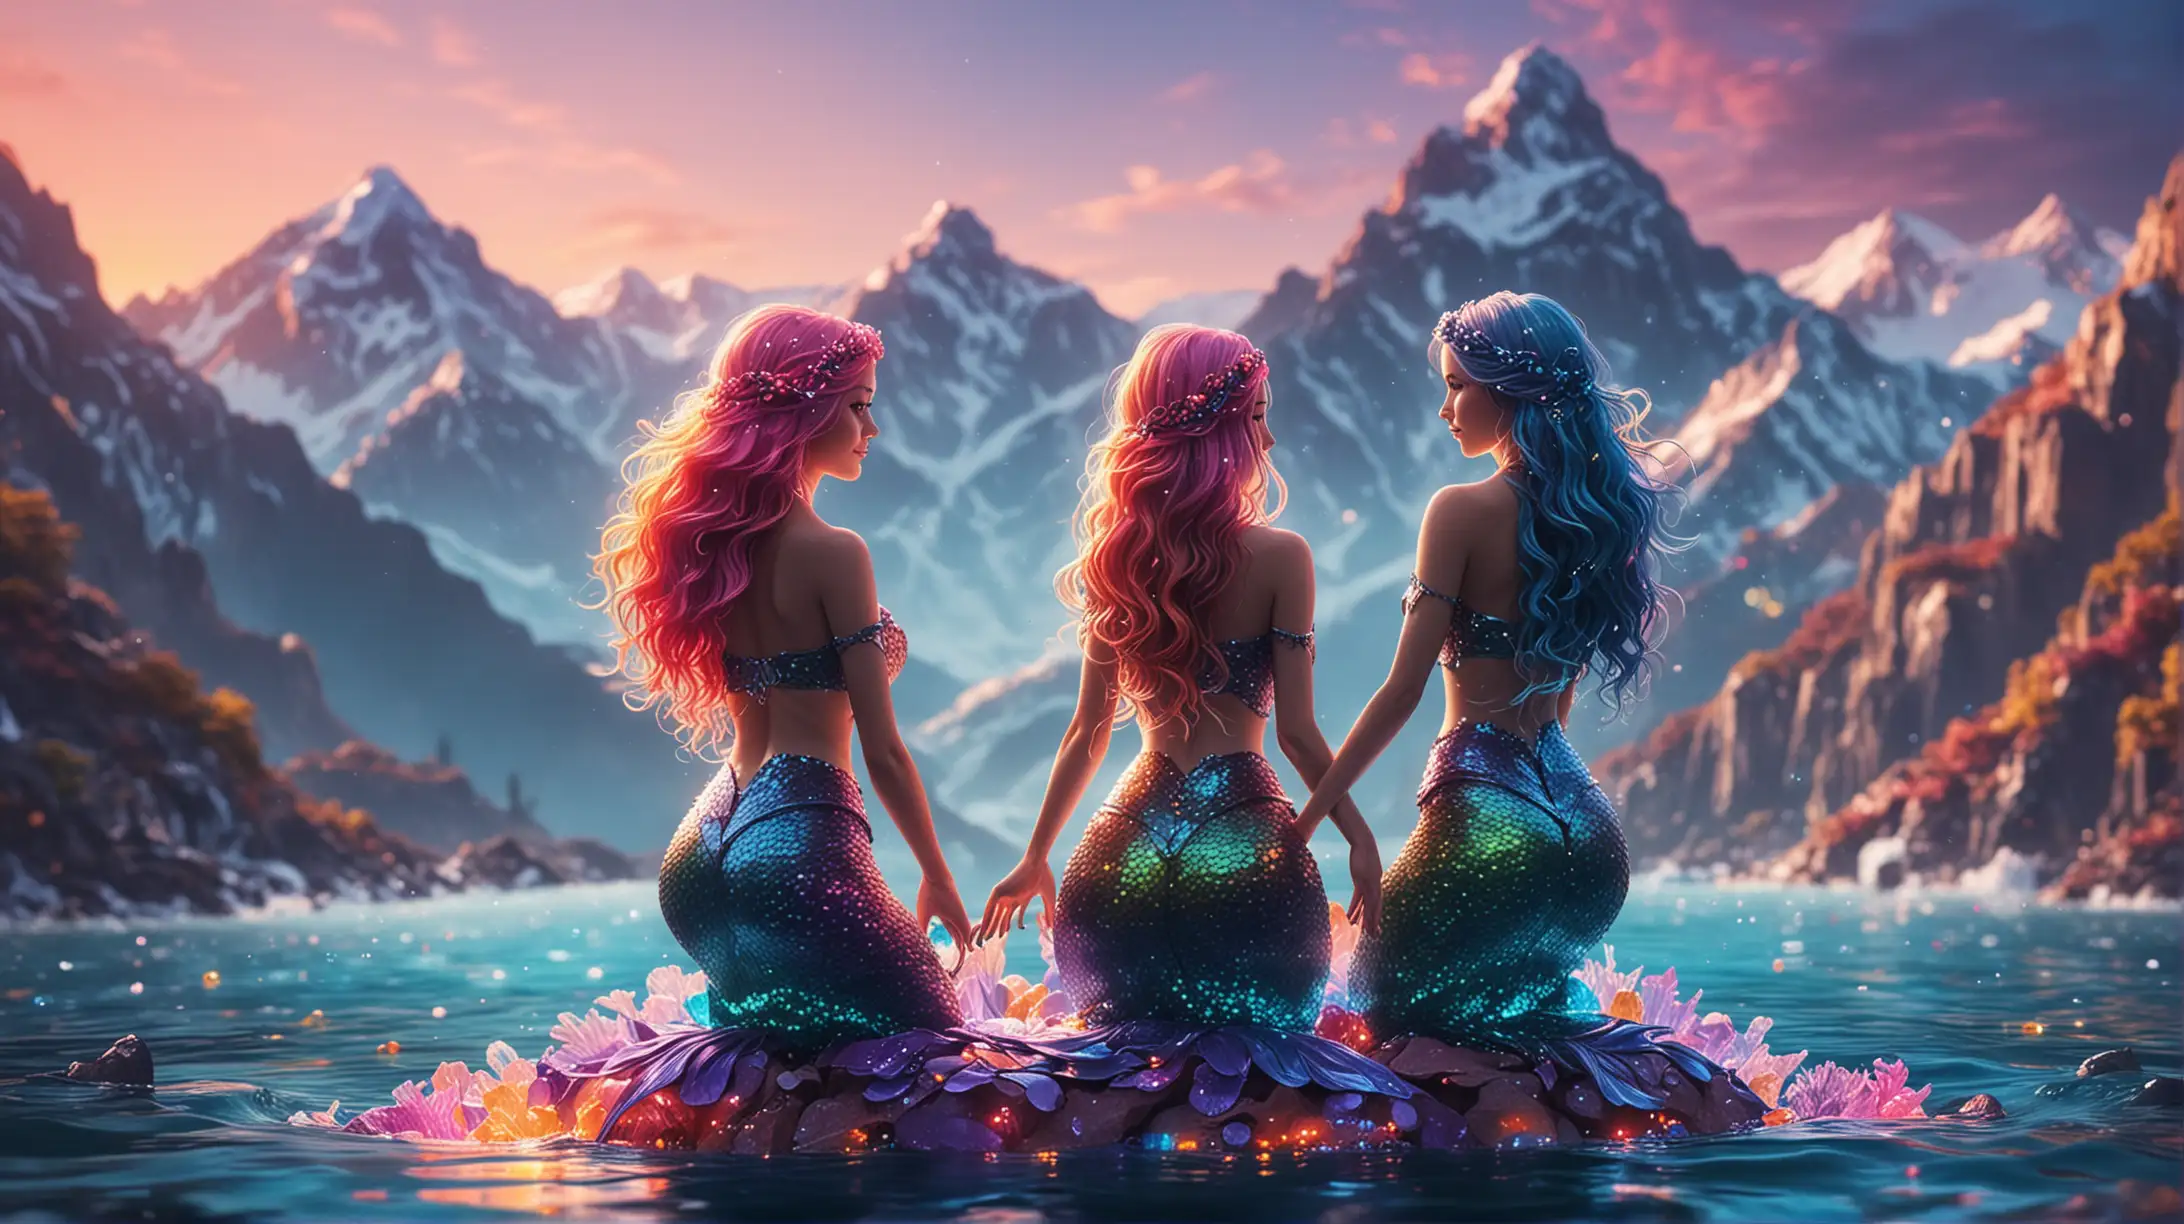 Colorful Neon Style Mermaids in Mountainous Fantasy Landscape